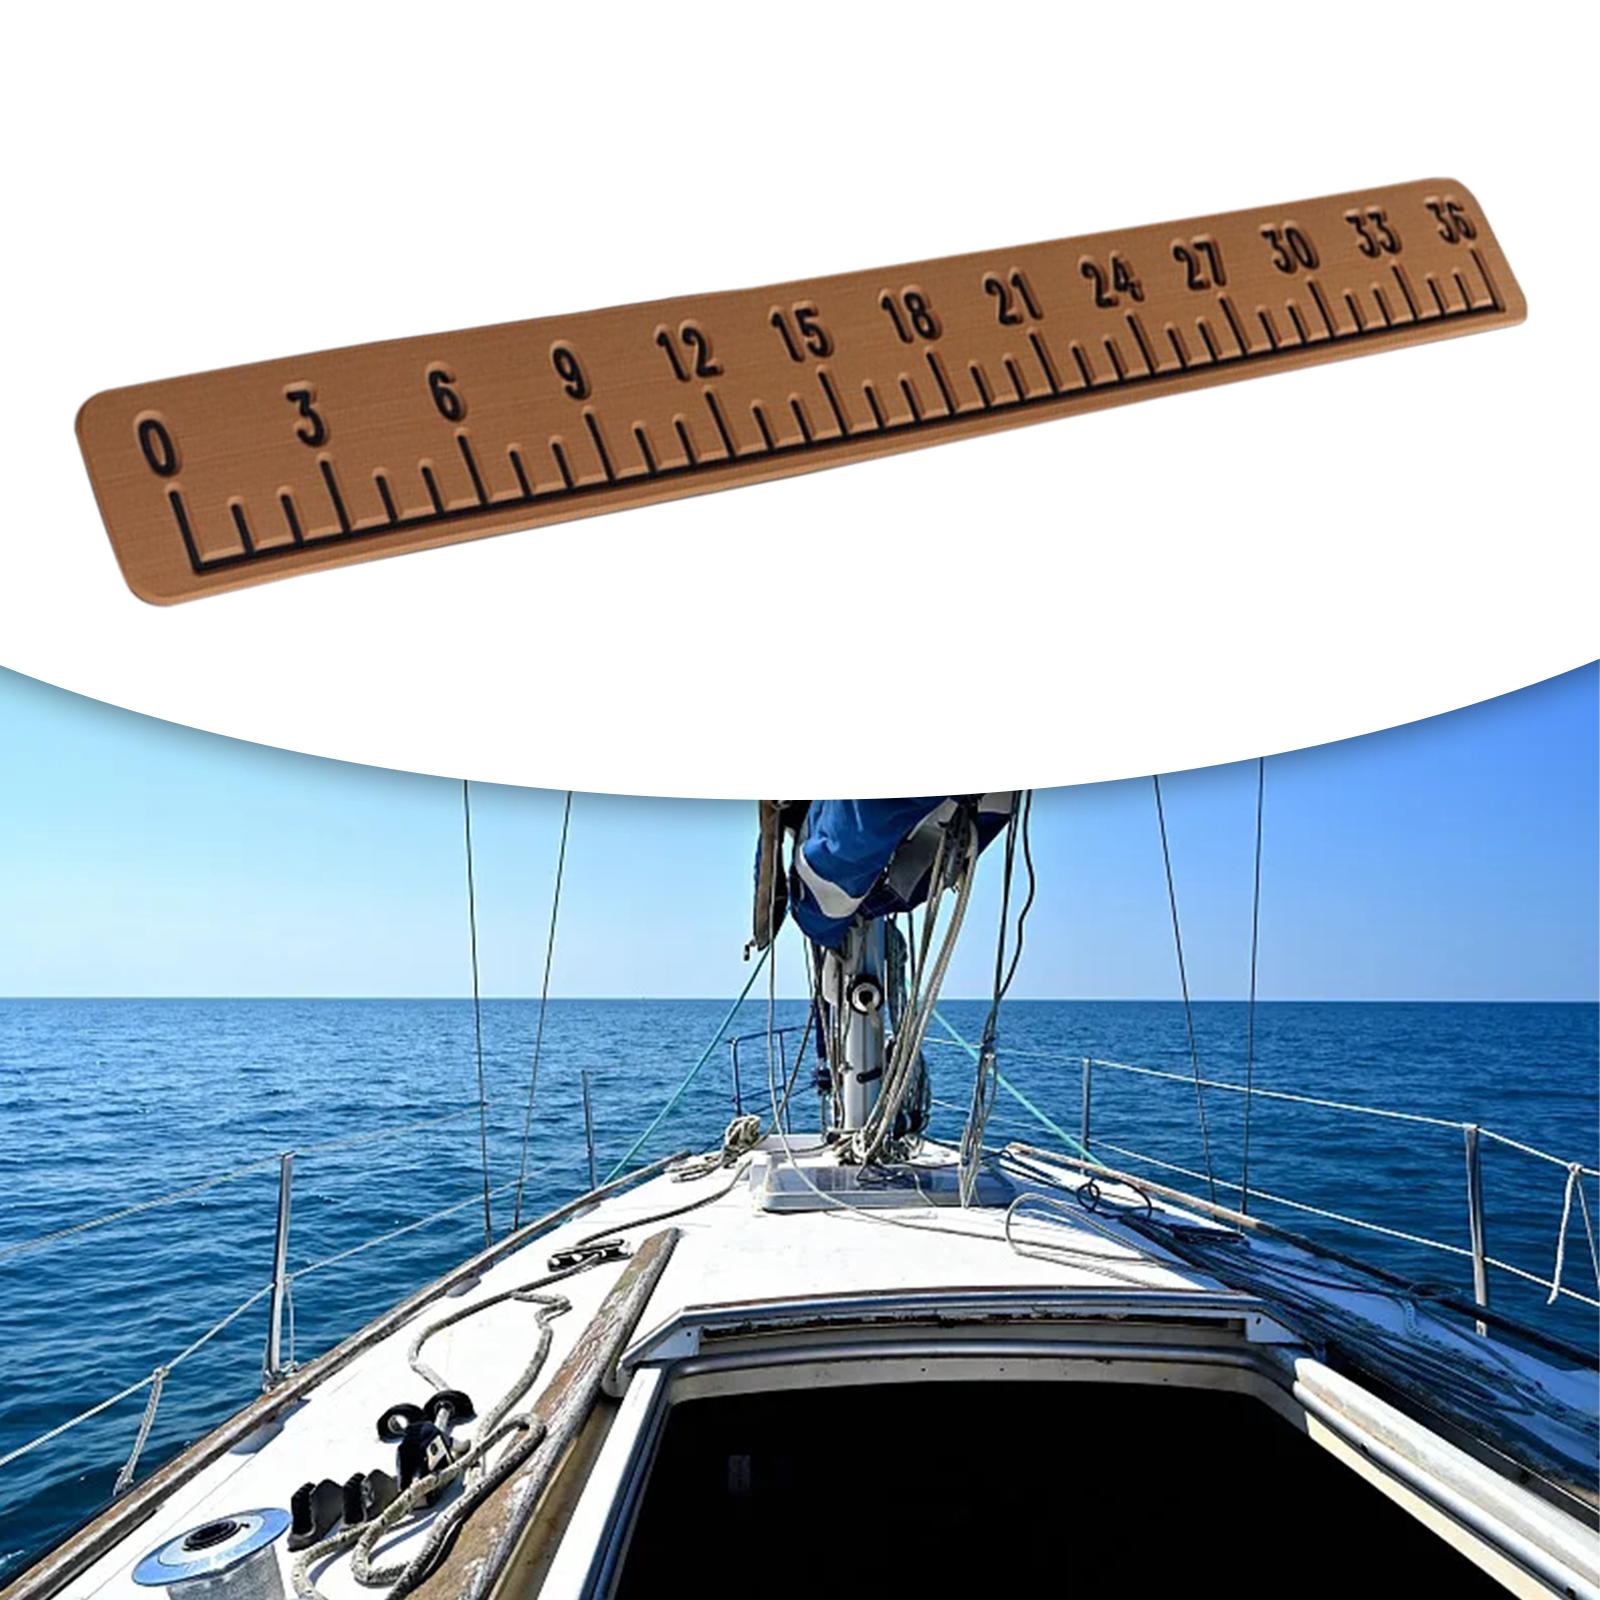 39" Fish Ruler for Boat Accurate 6mm Thickness High Density for Sailboats light black brown